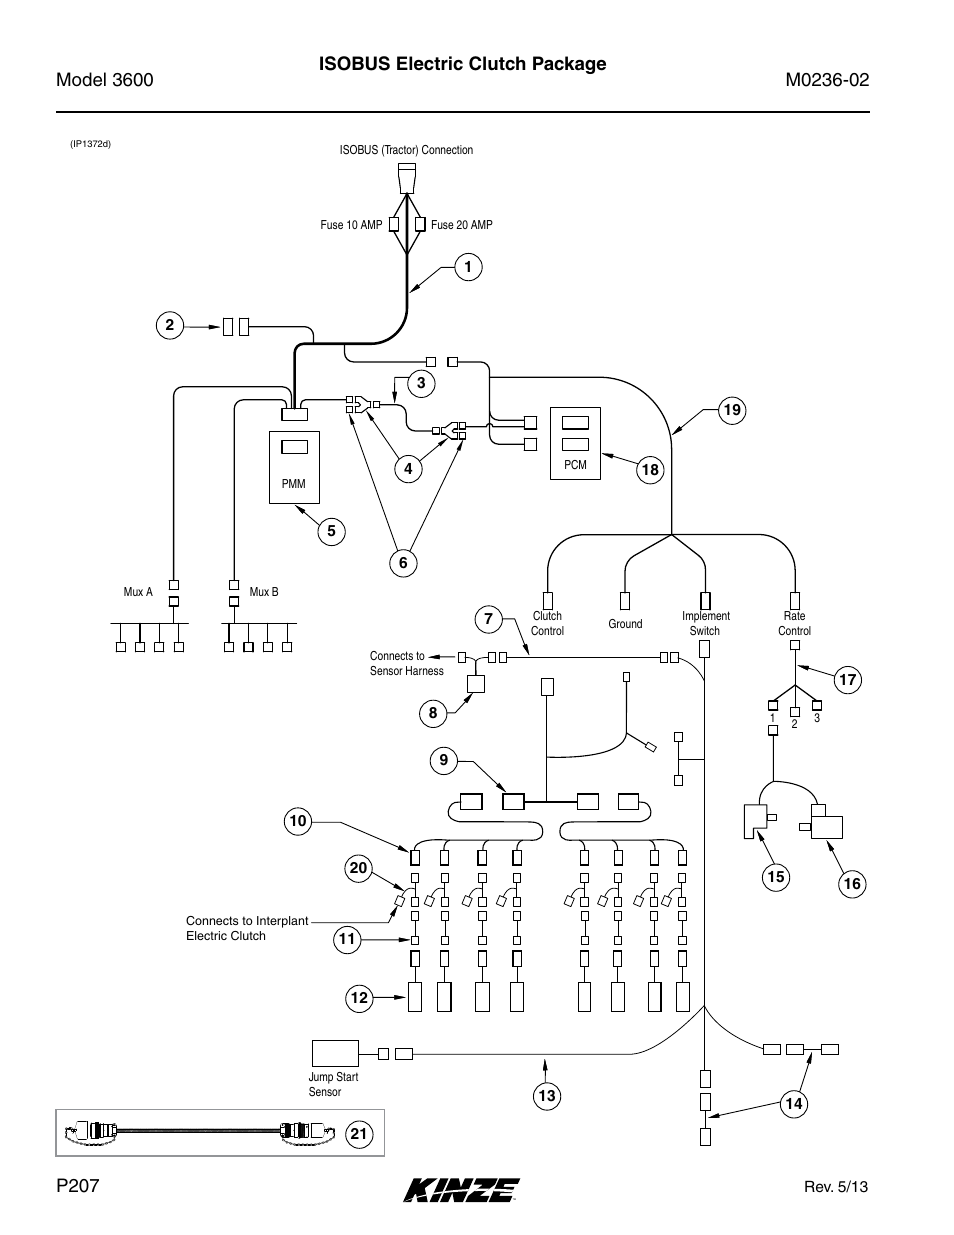 Isobus electric clutch package | Kinze 3600 Lift and Rotate Planter Rev. 5/14 User Manual | Page 210 / 302